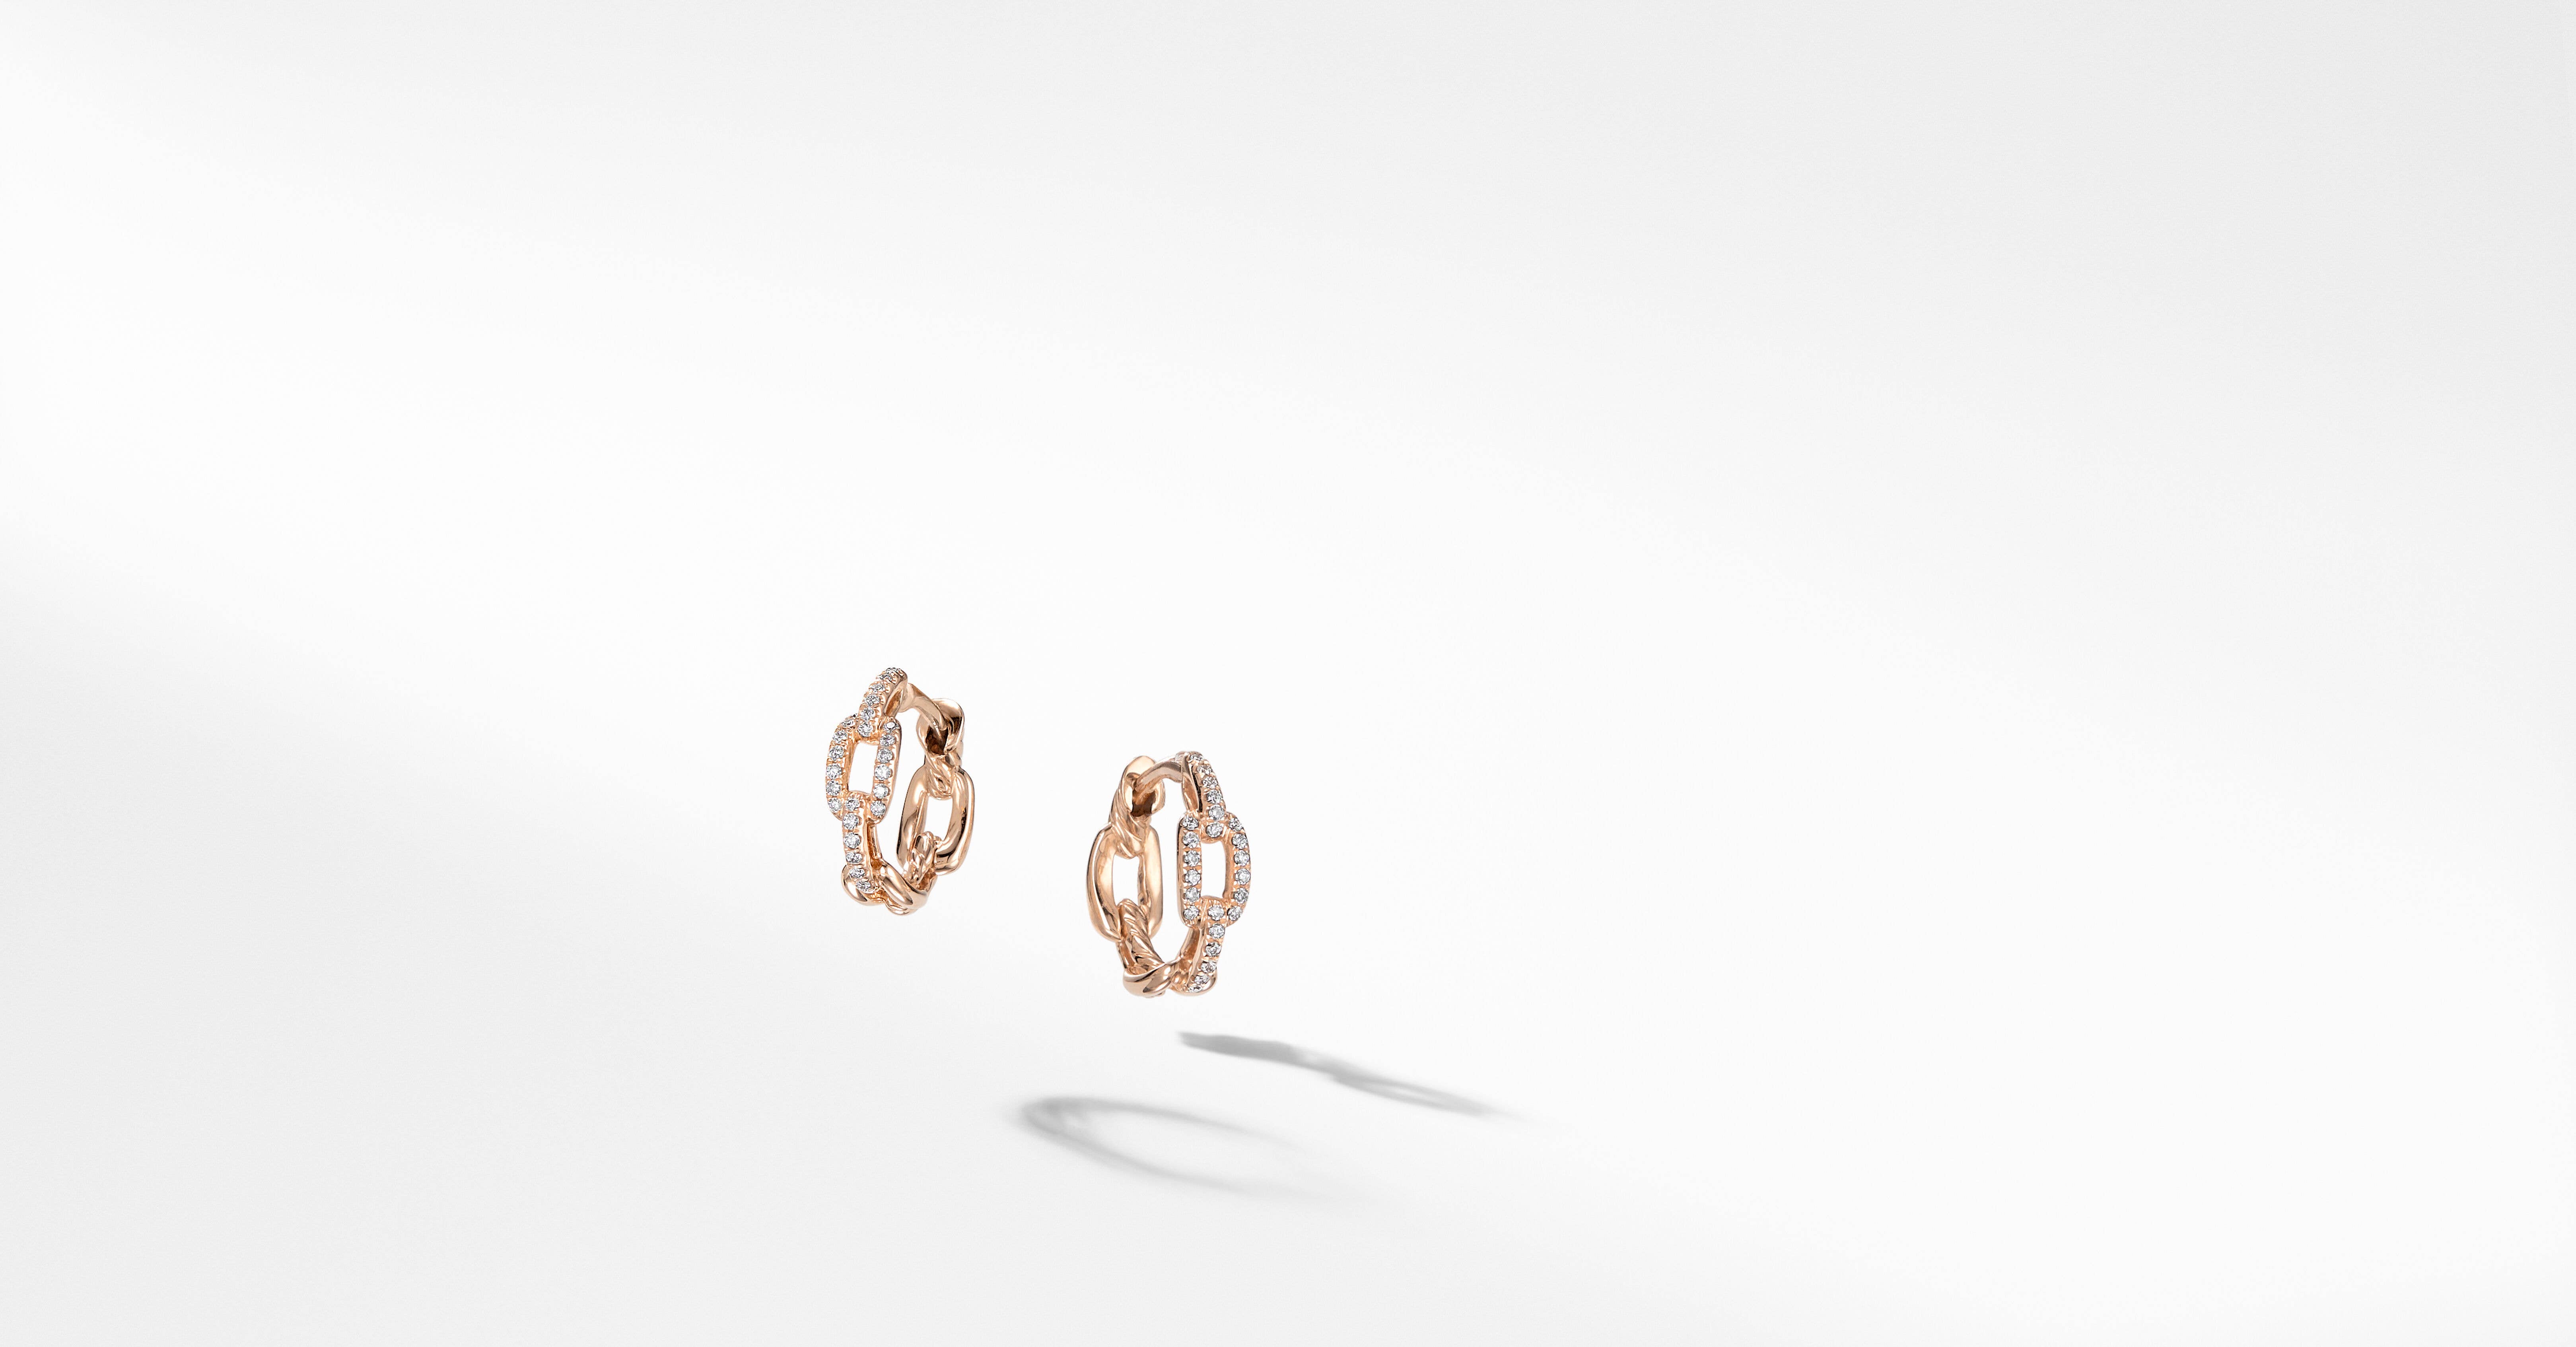 Palmonas 18k Rose Gold Plated Round Huggie Hoop Earrings for Women Buy  Palmonas 18k Rose Gold Plated Round Huggie Hoop Earrings for Women Online  at Best Price in India  Nykaa